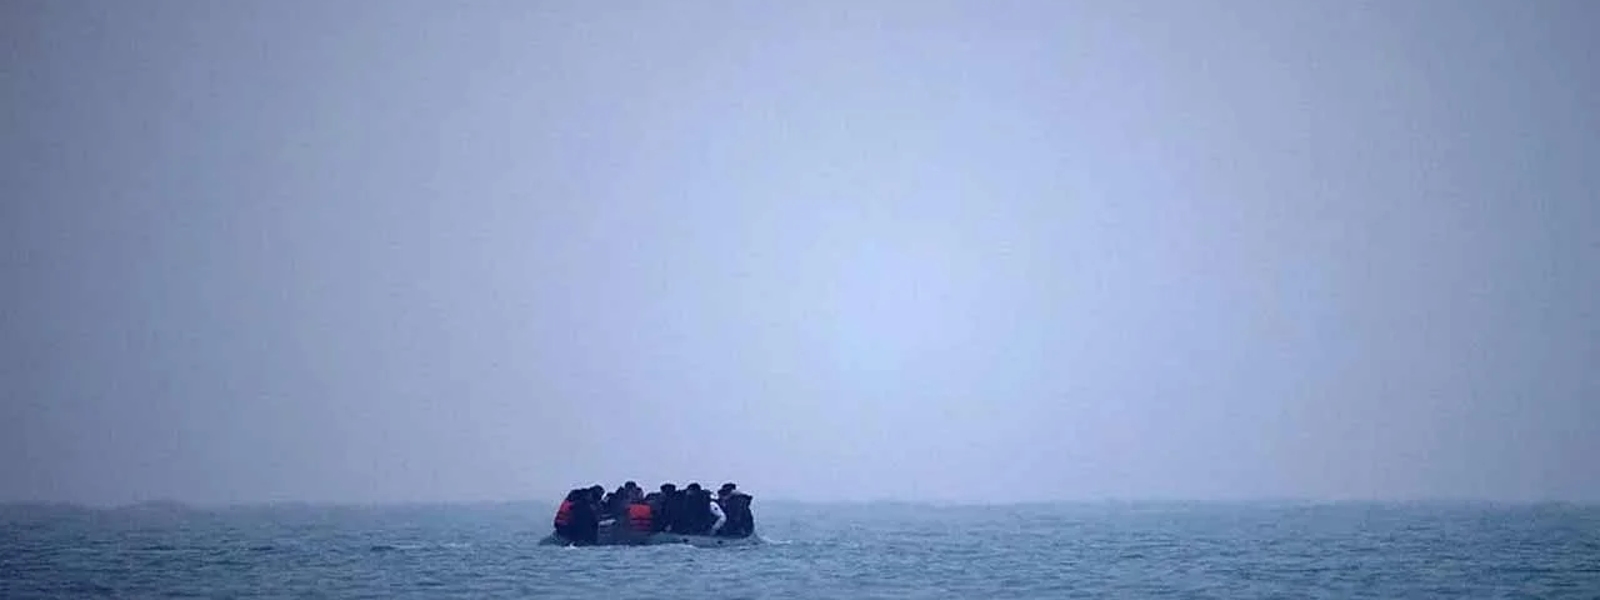 27 migrants drown in English Channel